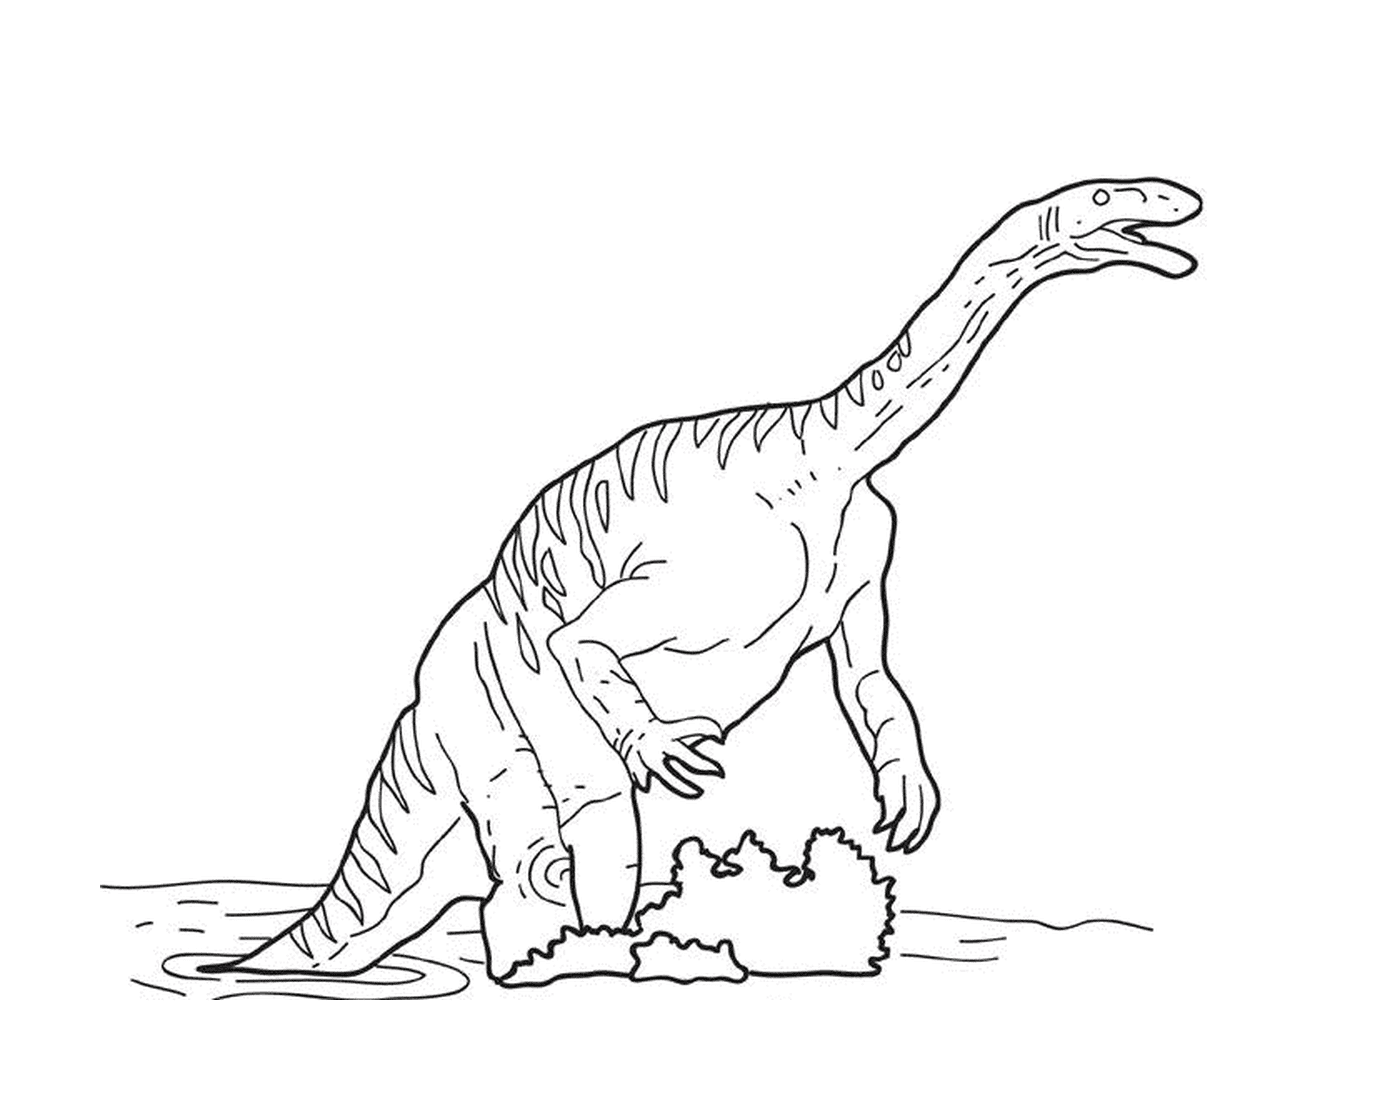  A dinosaur playing in the water 